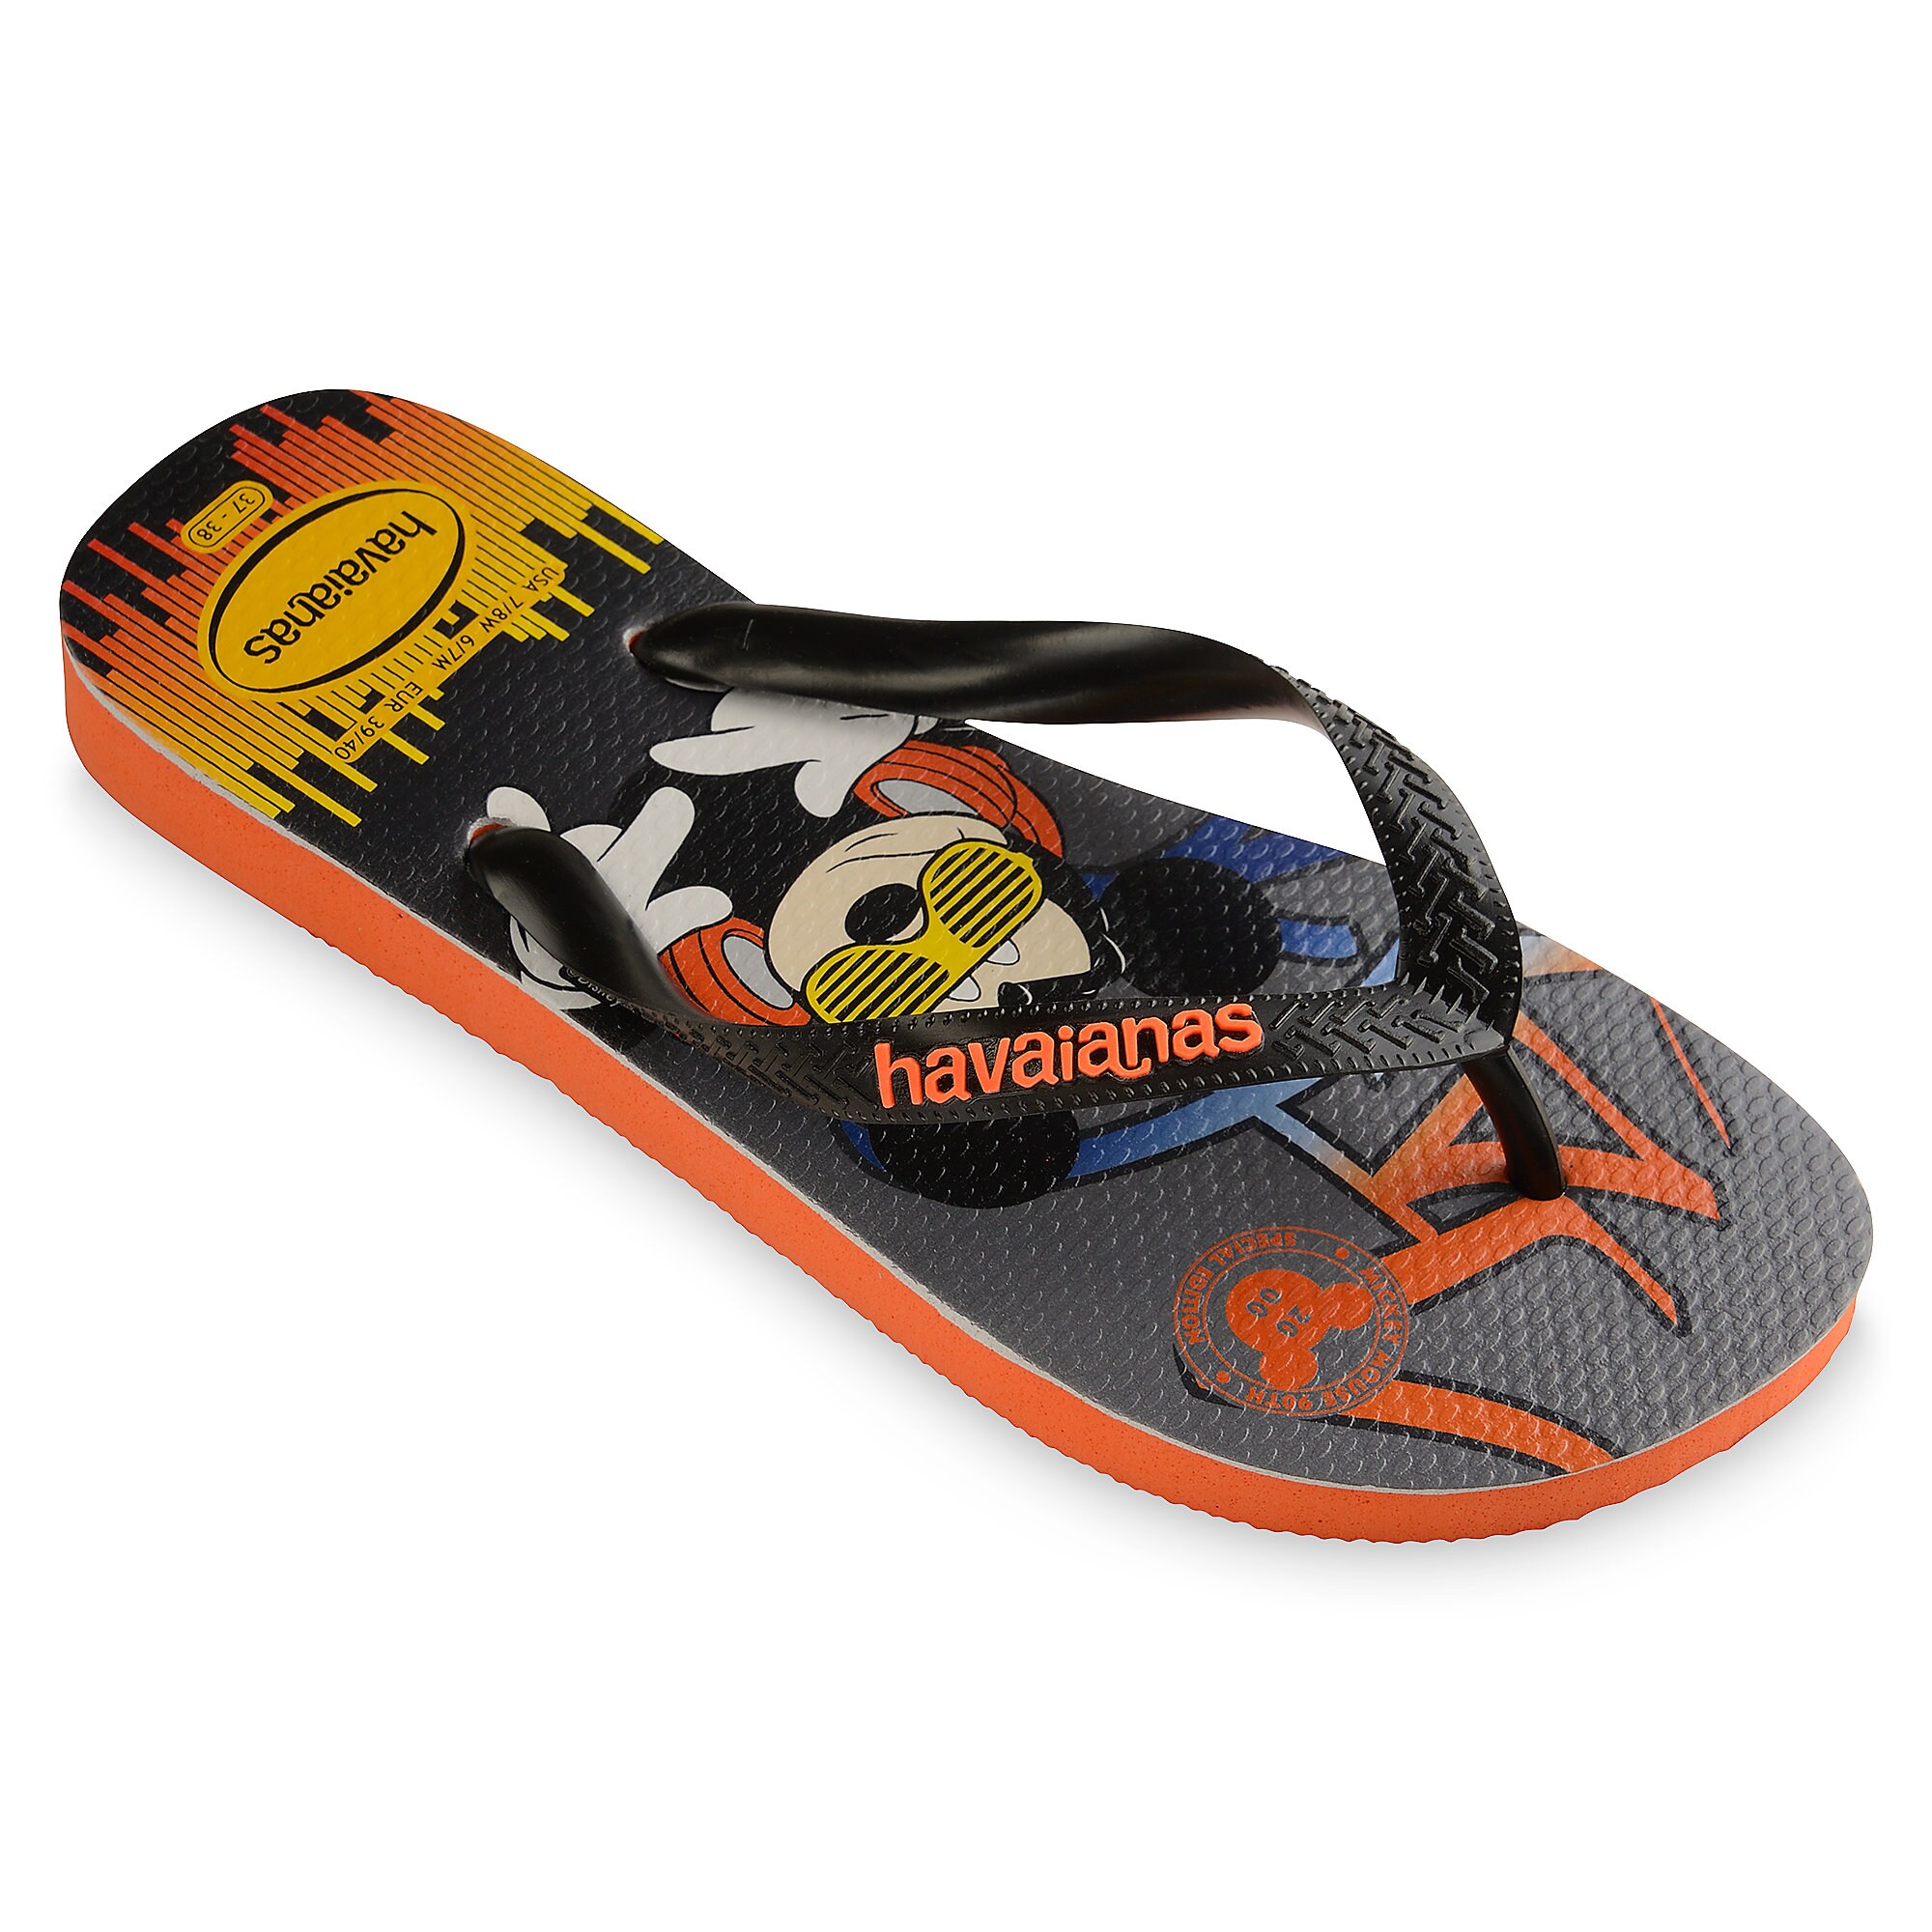  Mickey  Mouse  Hip Hop Flip Flops  for Adults by Havaianas  